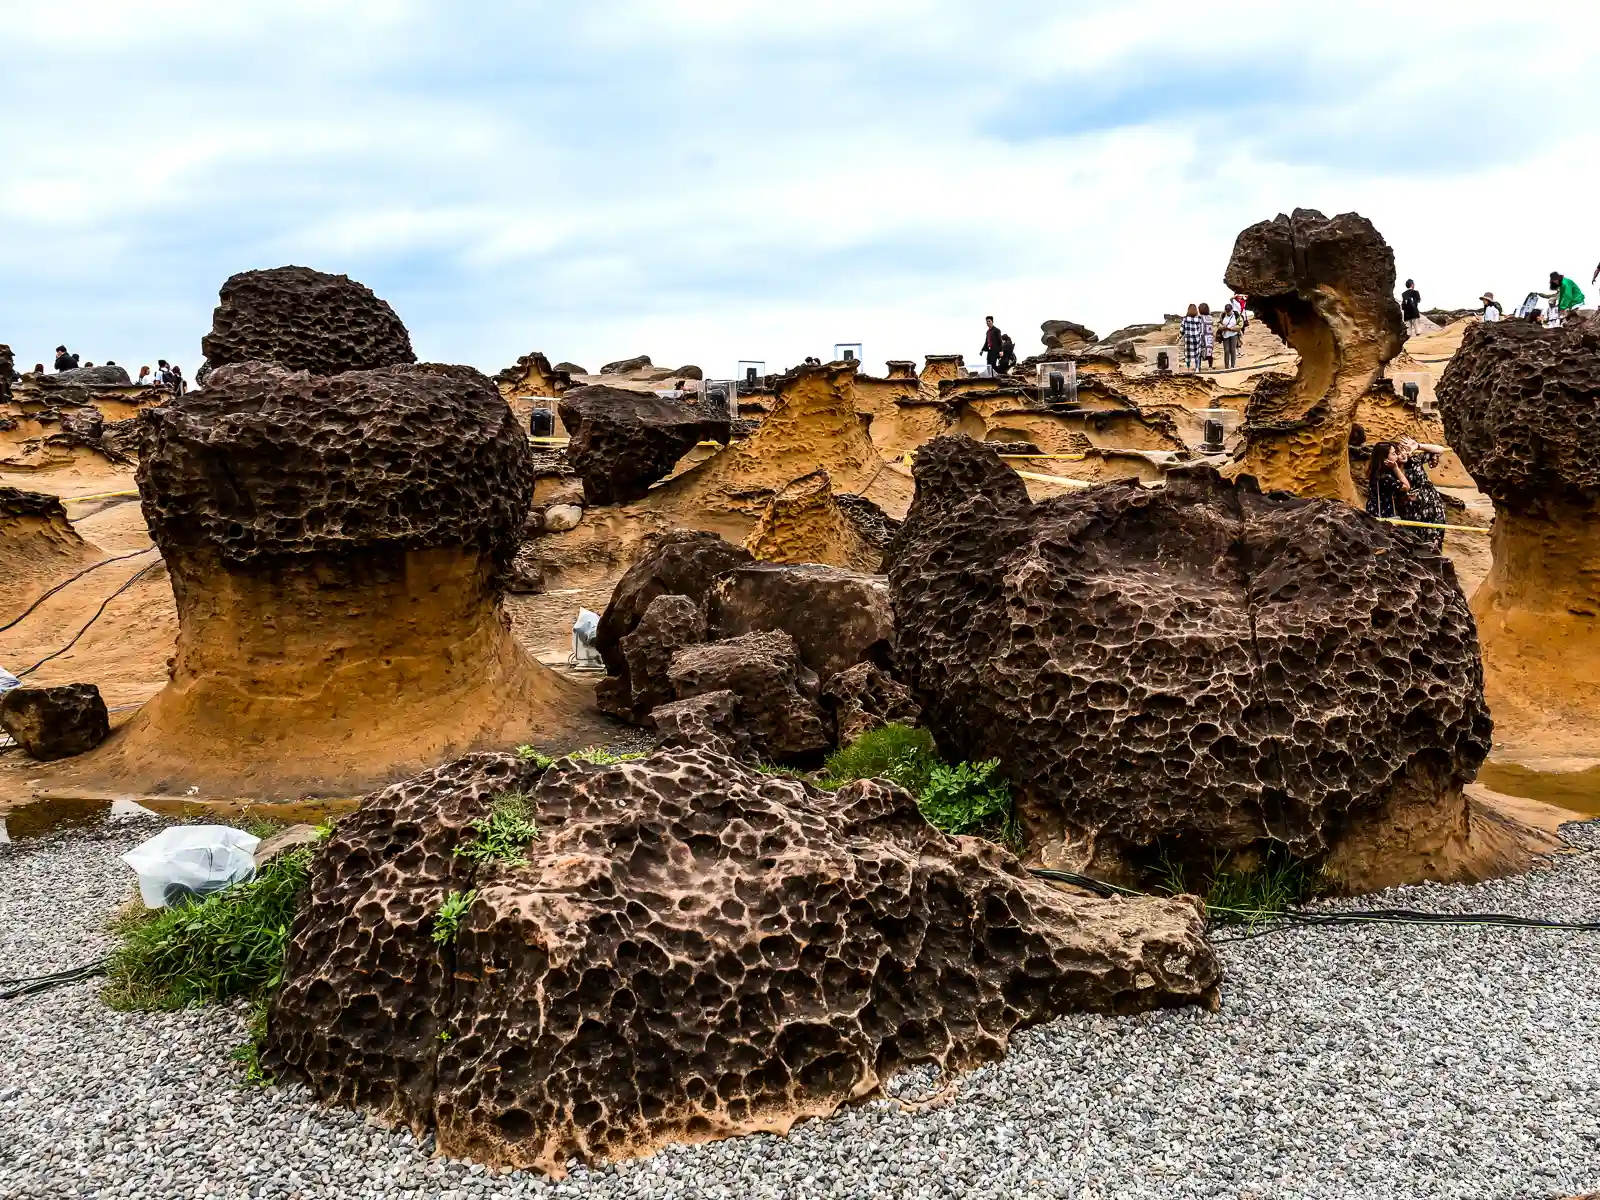 Rocks are covered in hundreds of pockets referred to as "honeycomb erosion".